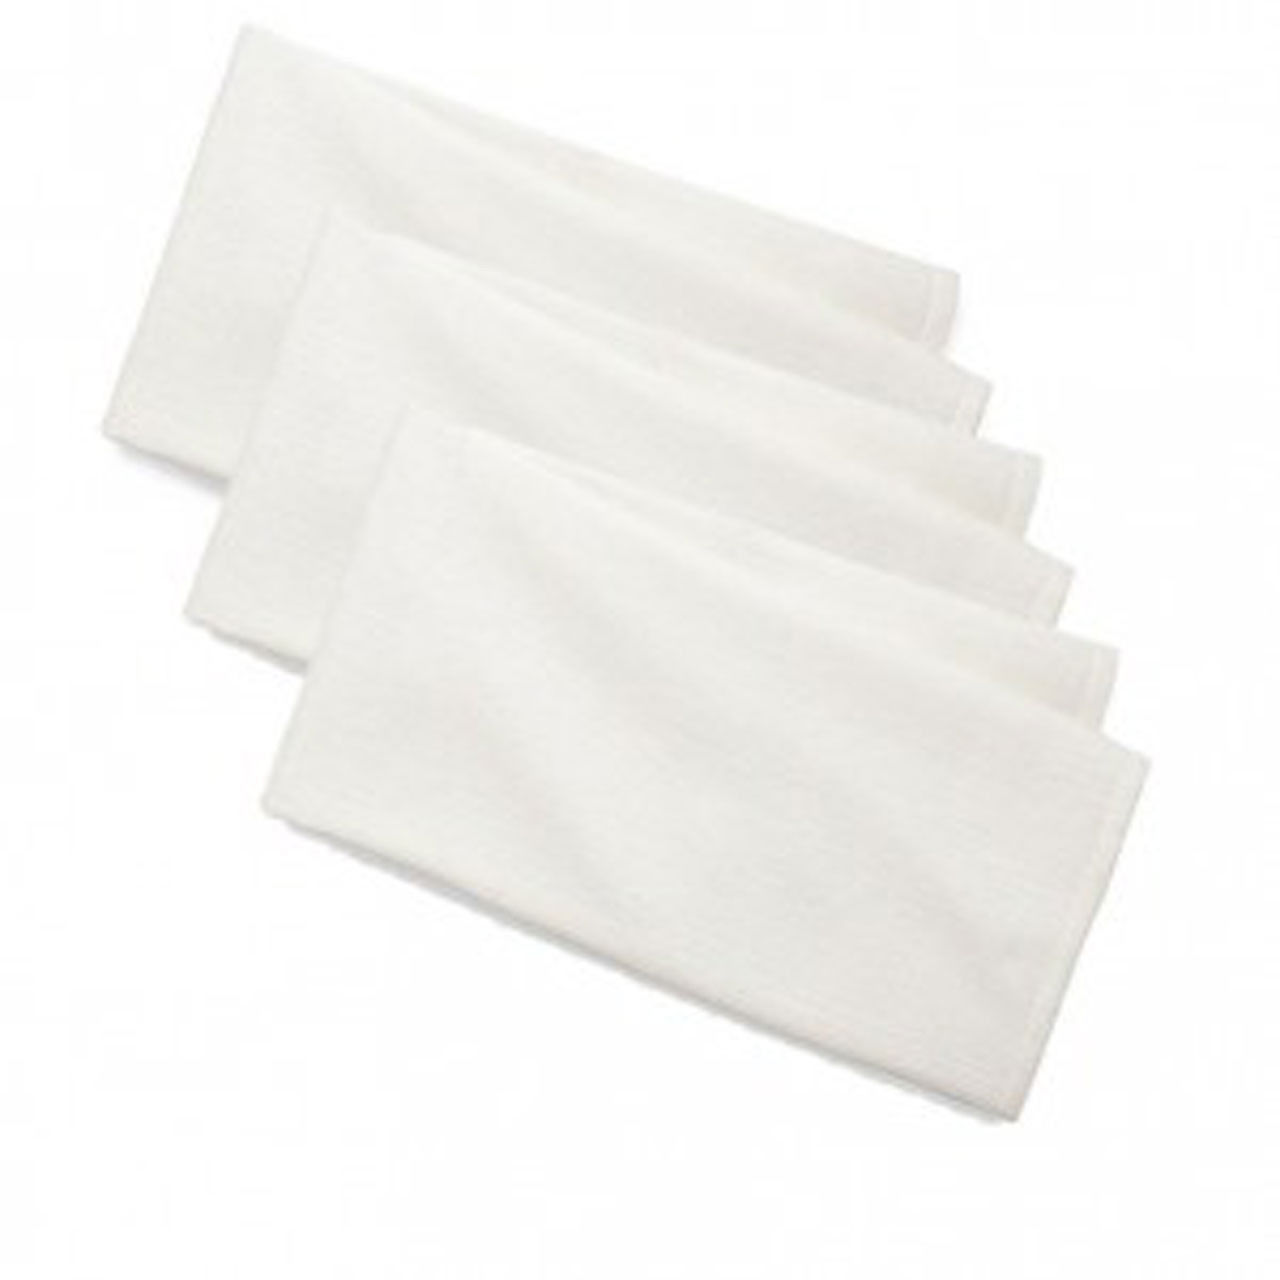 What are the perfect applications for huck towels?